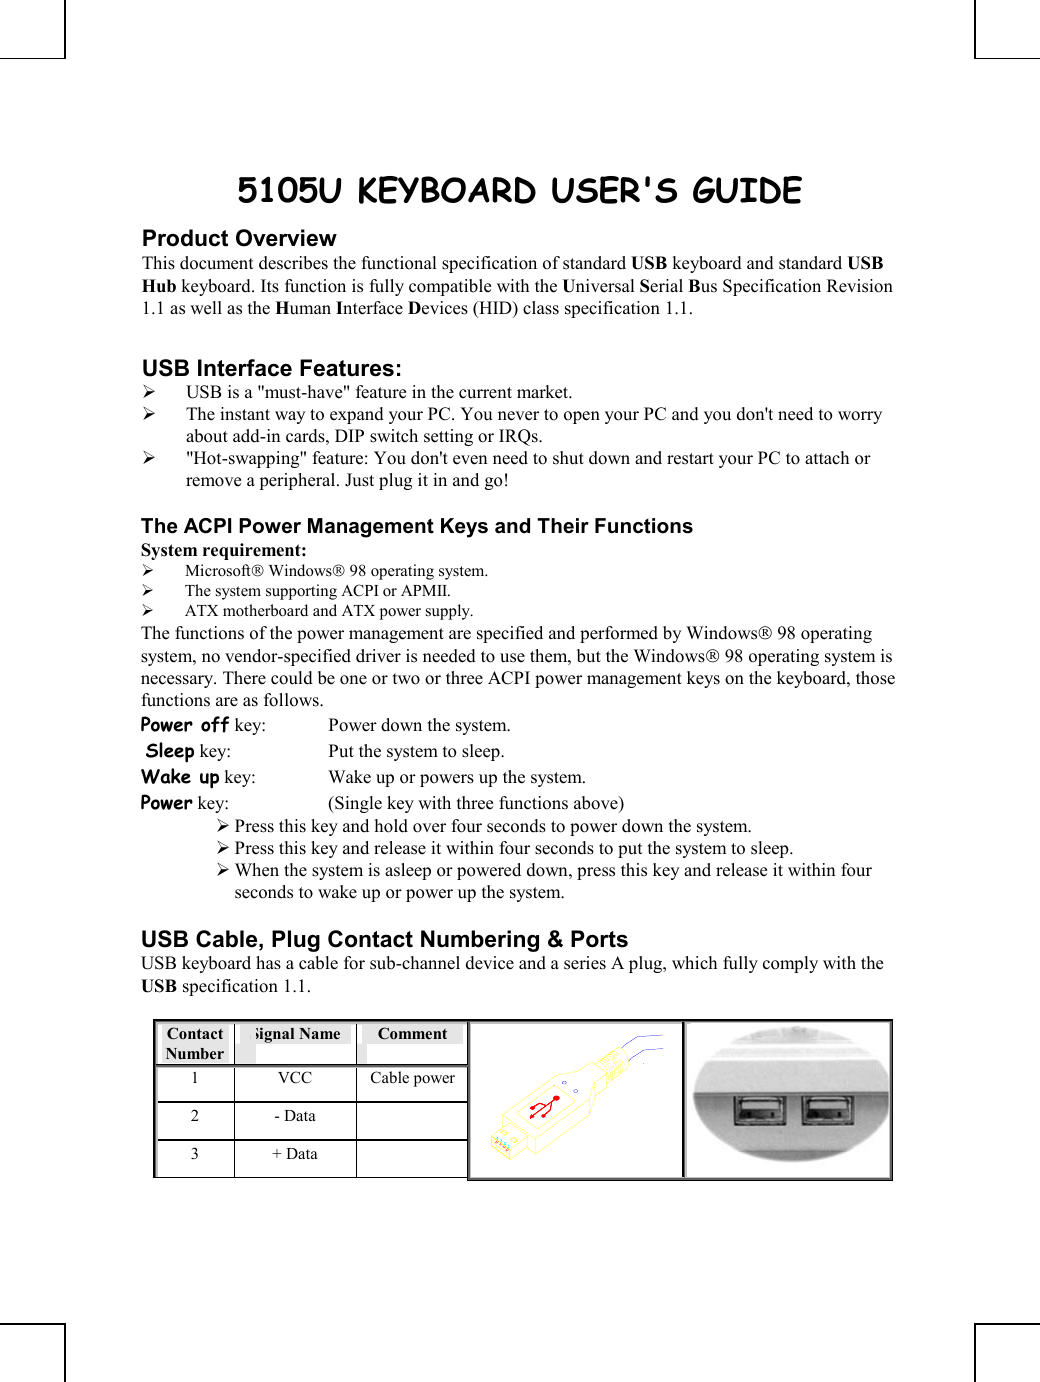       5105U KEYBOARD USER&apos;S GUIDE Product Overview This document describes the functional specification of standard USB keyboard and standard USB Hub keyboard. Its function is fully compatible with the Universal Serial Bus Specification Revision 1.1 as well as the Human Interface Devices (HID) class specification 1.1.  USB Interface Features:   USB is a &quot;must-have&quot; feature in the current market.   The instant way to expand your PC. You never to open your PC and you don&apos;t need to worry about add-in cards, DIP switch setting or IRQs.   &quot;Hot-swapping&quot; feature: You don&apos;t even need to shut down and restart your PC to attach or remove a peripheral. Just plug it in and go!  The ACPI Power Management Keys and Their Functions System requirement:    Microsoft Windows 98 operating system.   The system supporting ACPI or APMII.   ATX motherboard and ATX power supply. The functions of the power management are specified and performed by Windows 98 operating system, no vendor-specified driver is needed to use them, but the Windows 98 operating system is necessary. There could be one or two or three ACPI power management keys on the keyboard, those functions are as follows. Power off key:  Power down the system.  Sleep key:  Put the system to sleep.  Wake up key:  Wake up or powers up the system.  Power key:  (Single key with three functions above)       Press this key and hold over four seconds to power down the system.  Press this key and release it within four seconds to put the system to sleep.  When the system is asleep or powered down, press this key and release it within four seconds to wake up or power up the system.  USB Cable, Plug Contact Numbering &amp; Ports USB keyboard has a cable for sub-channel device and a series A plug, which fully comply with the USB specification 1.1.  Contact Number Signal Name   Comment 1 VCC Cable power2 - Data   3 + Data    